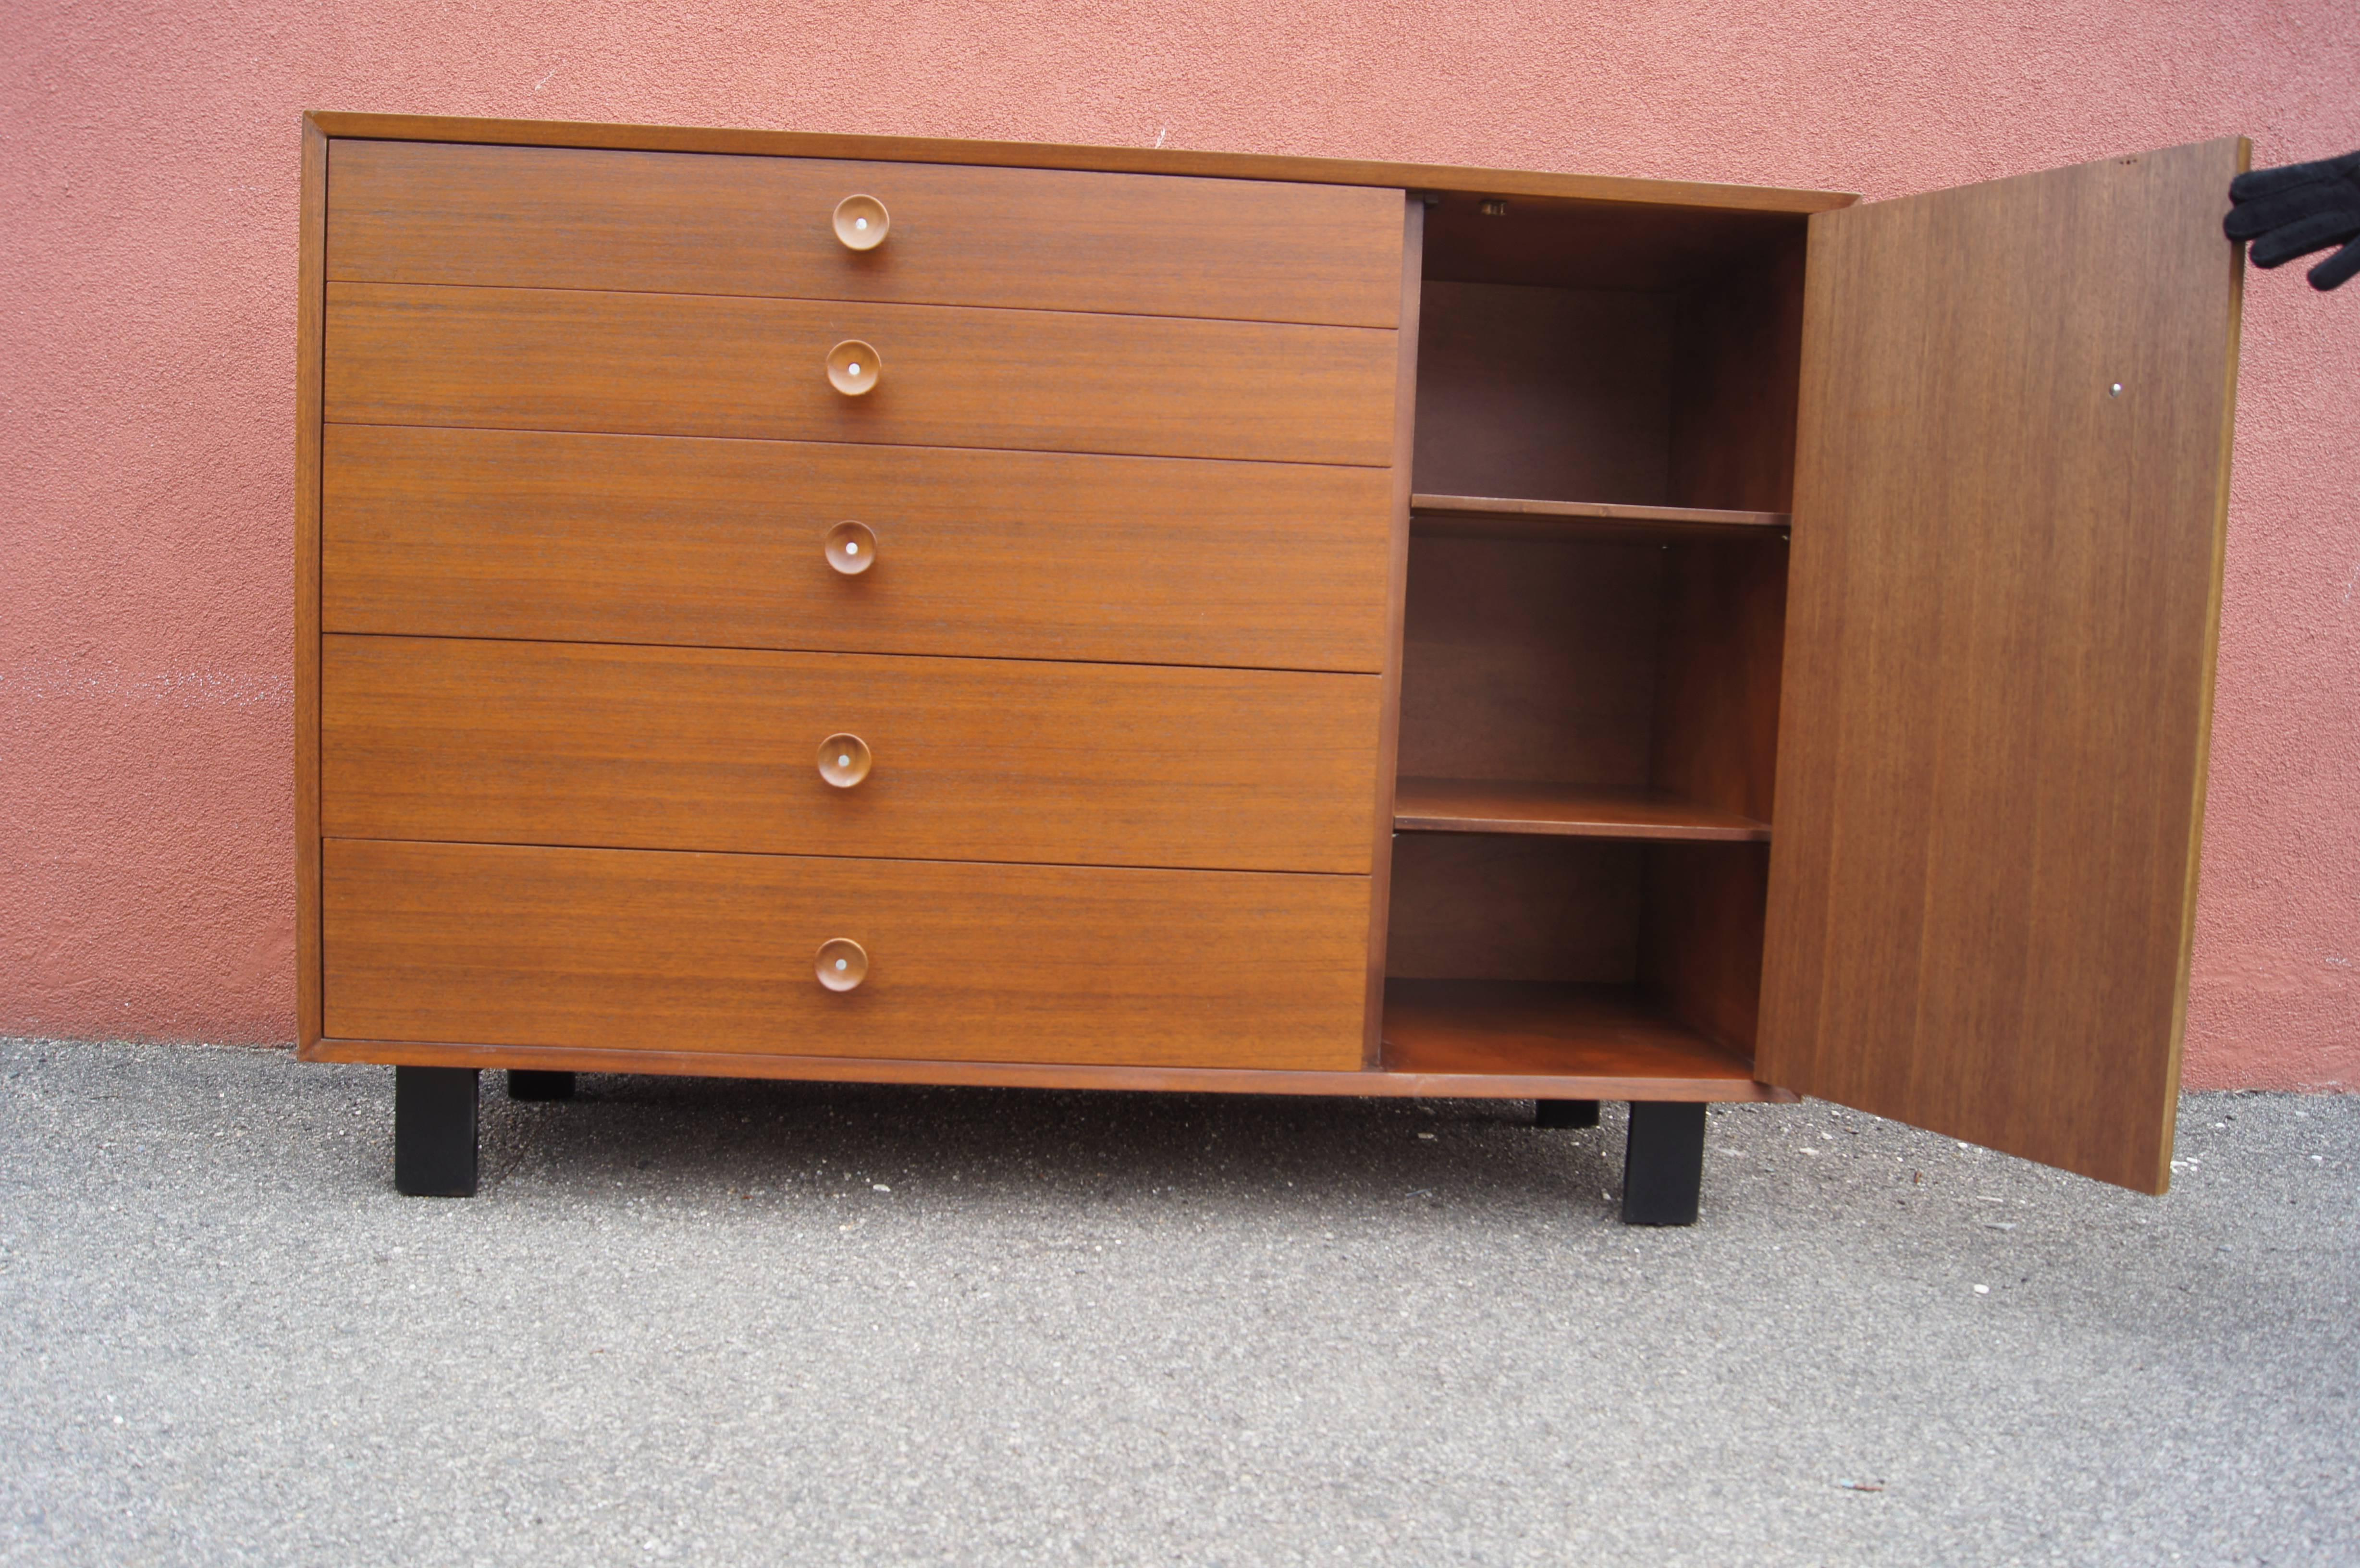 Mid-20th Century Walnut Dresser or Cabinet, Model 4935 by George Nelson for Herman Miller